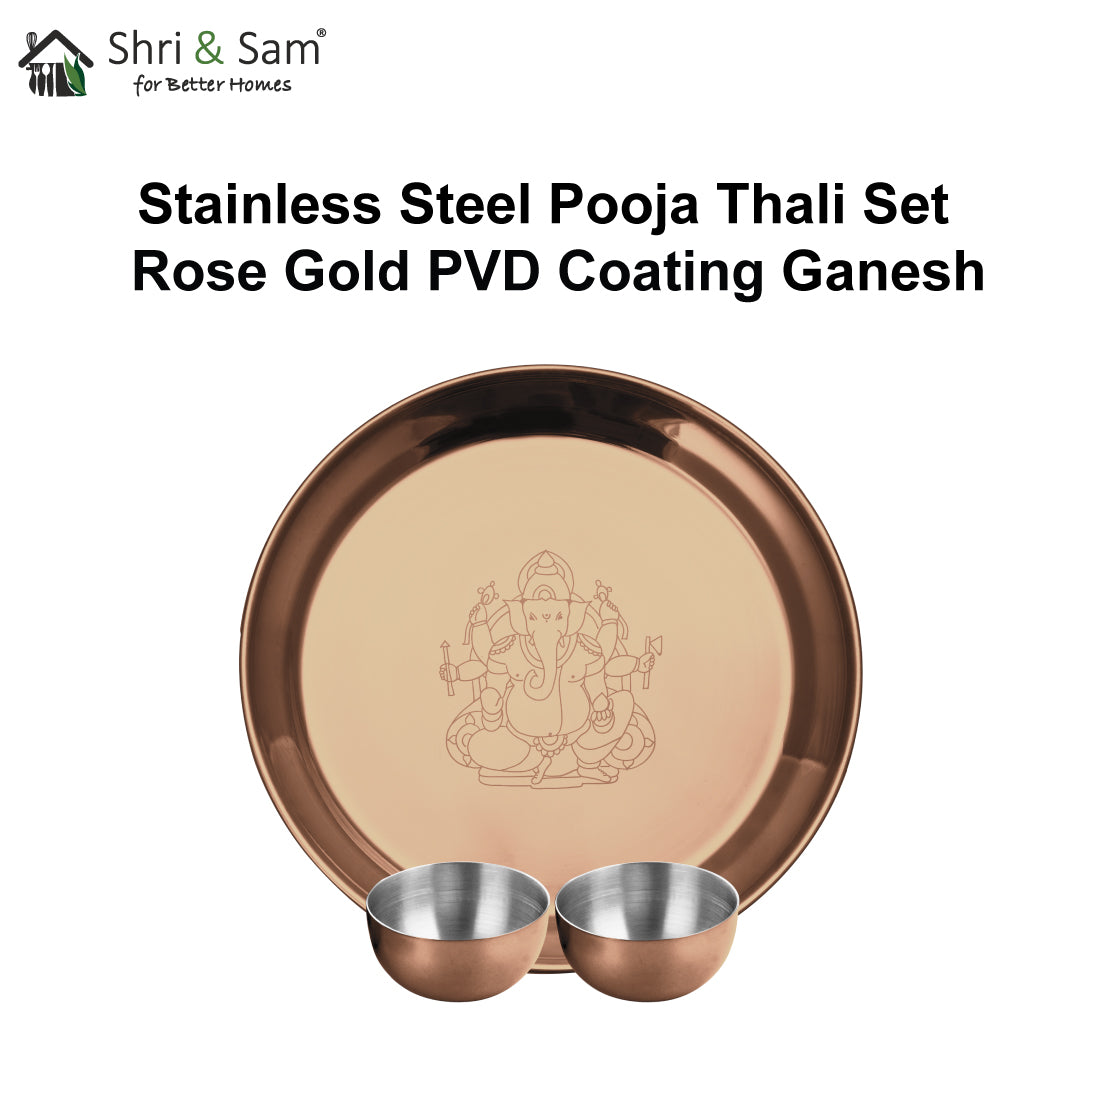 Stainless Steel Pooja Thali Set with Rose Gold PVD Coating Ganesh